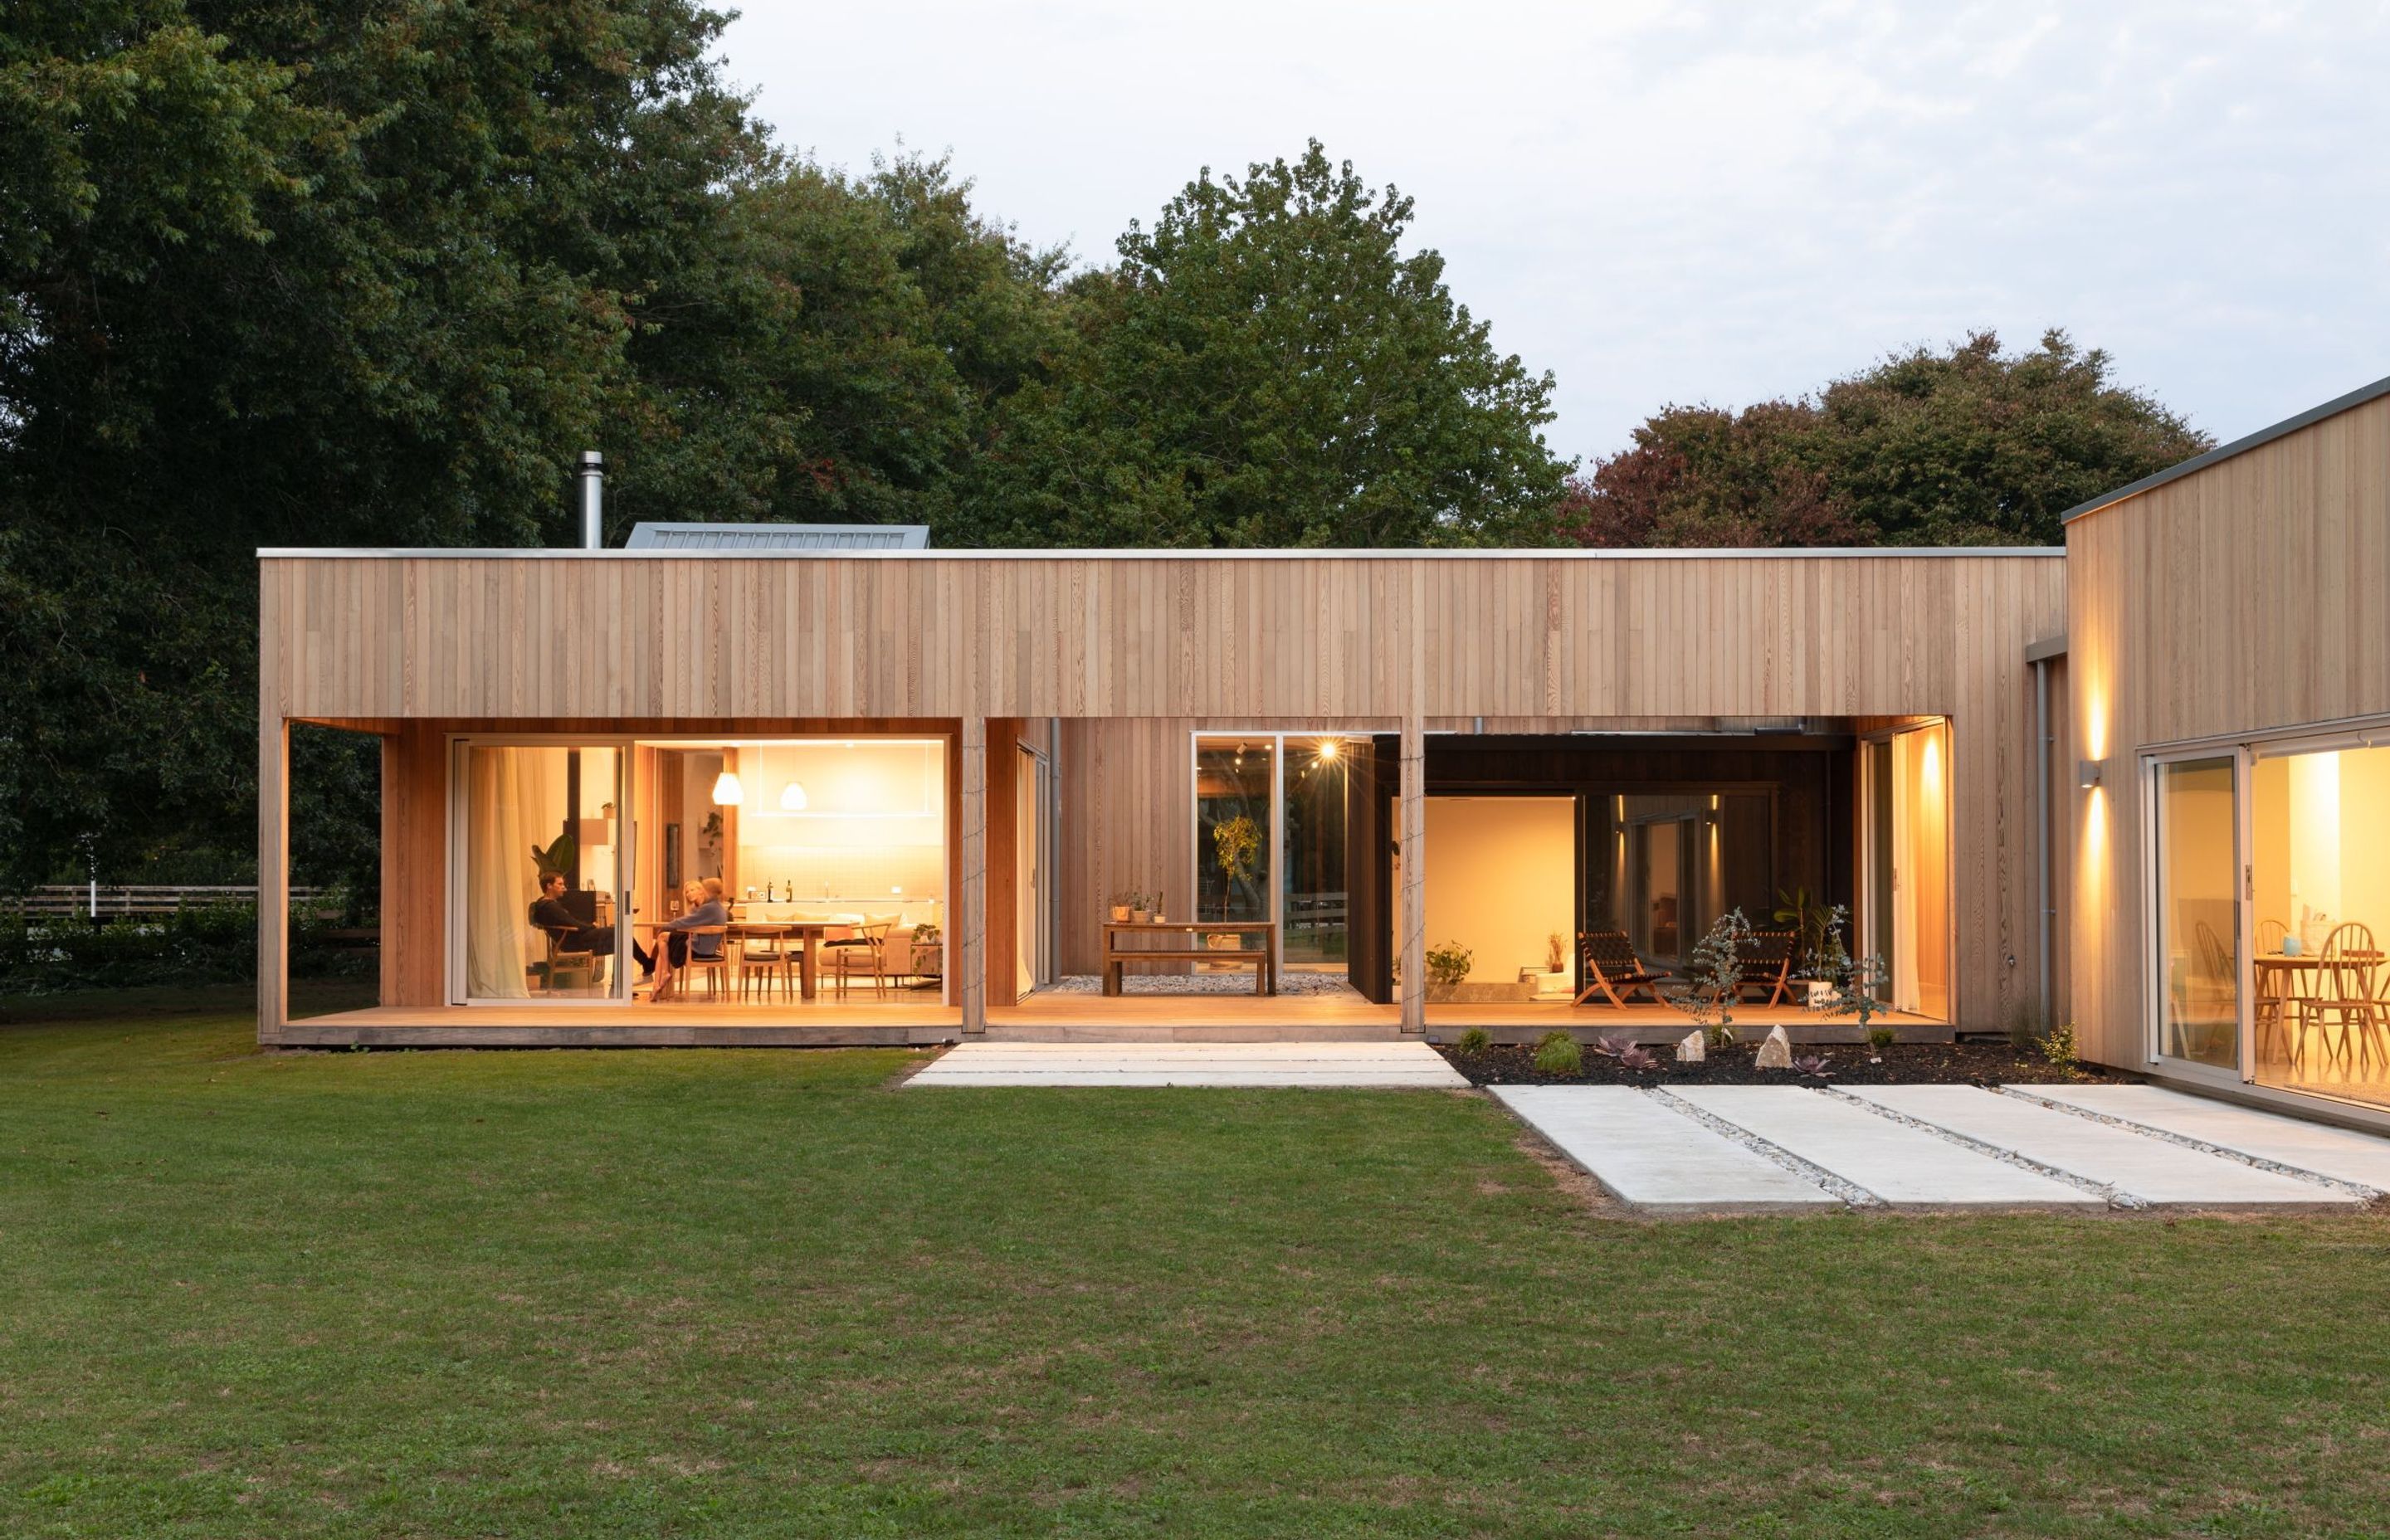 The main pavilion contains the living and dining areas, and an internal courtyard. The spatial arrangement creates a sense of a journey through the home.